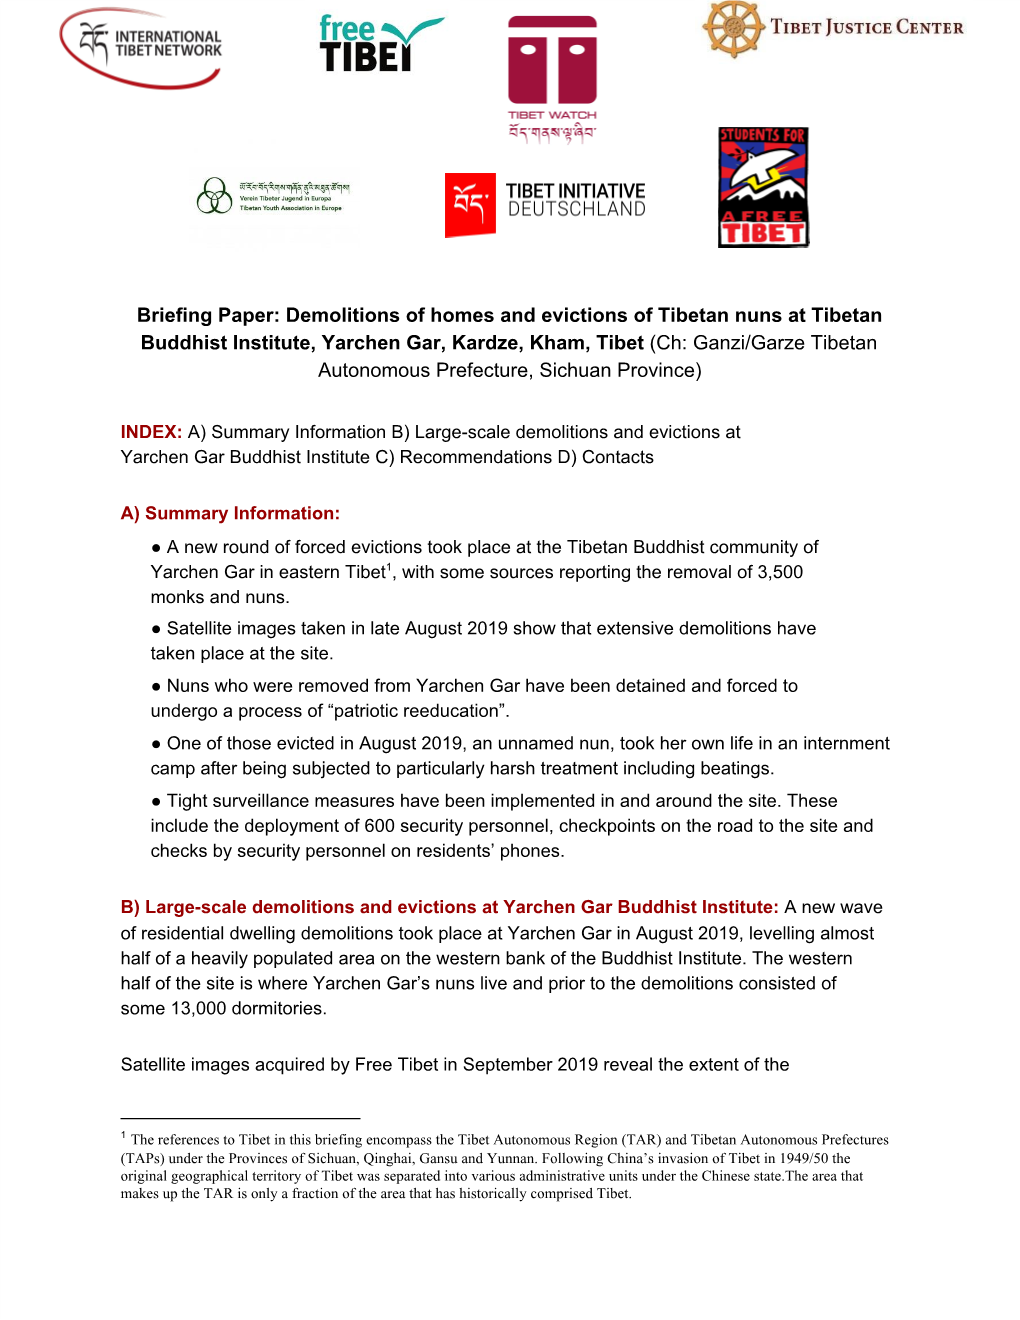 Briefing Paper: Demolitions of Homes and Evictions of Tibetan Nuns At